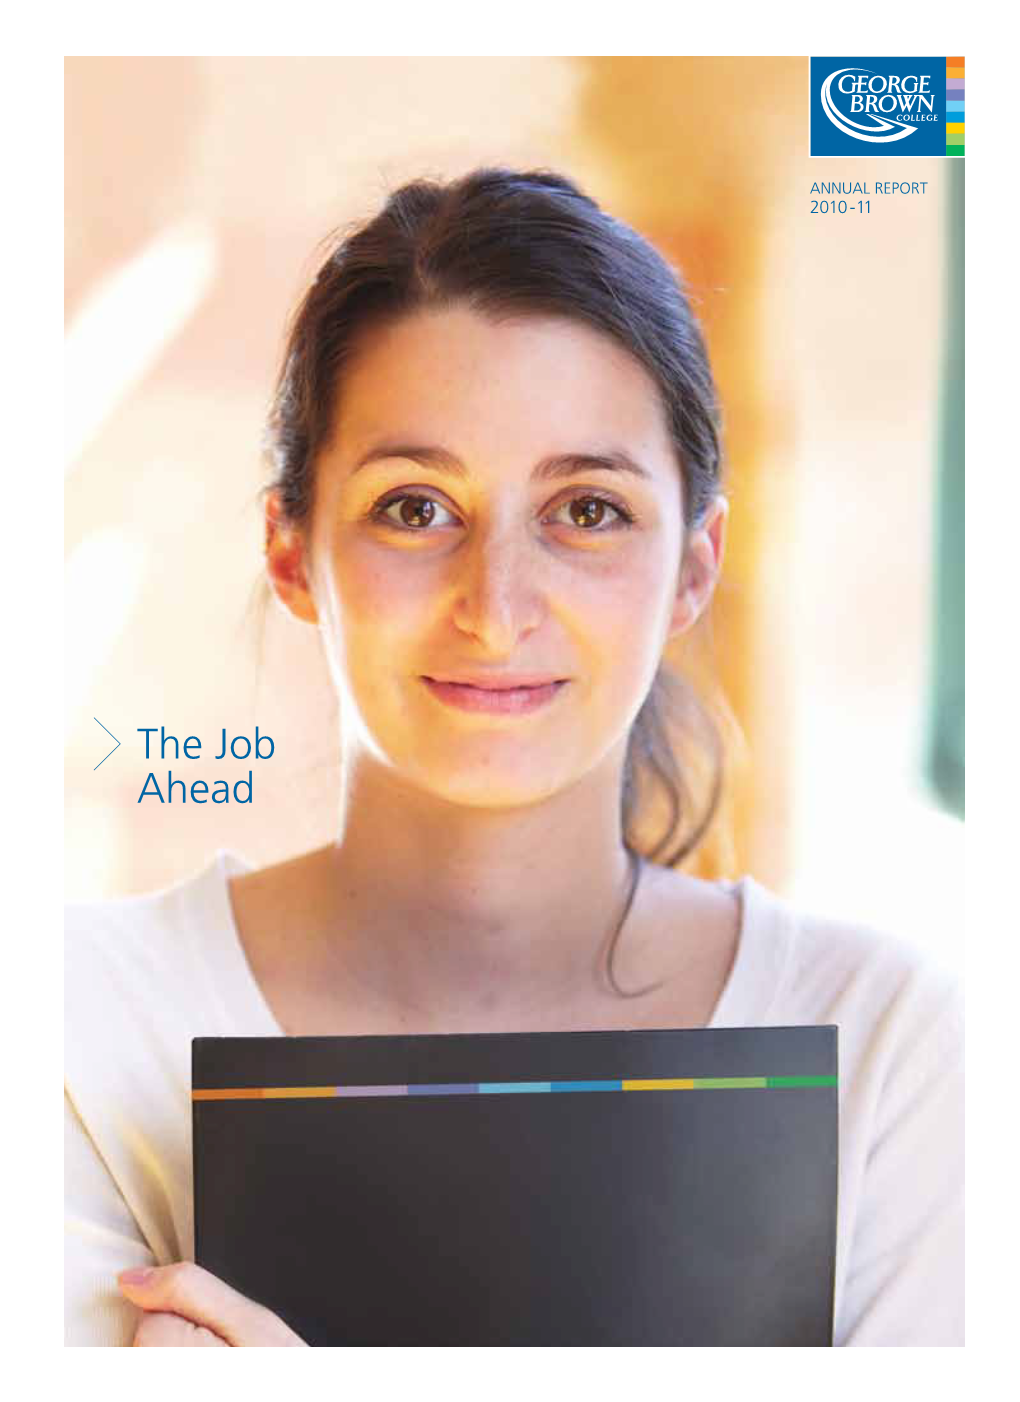 The Job Ahead Annual Report 2010-11